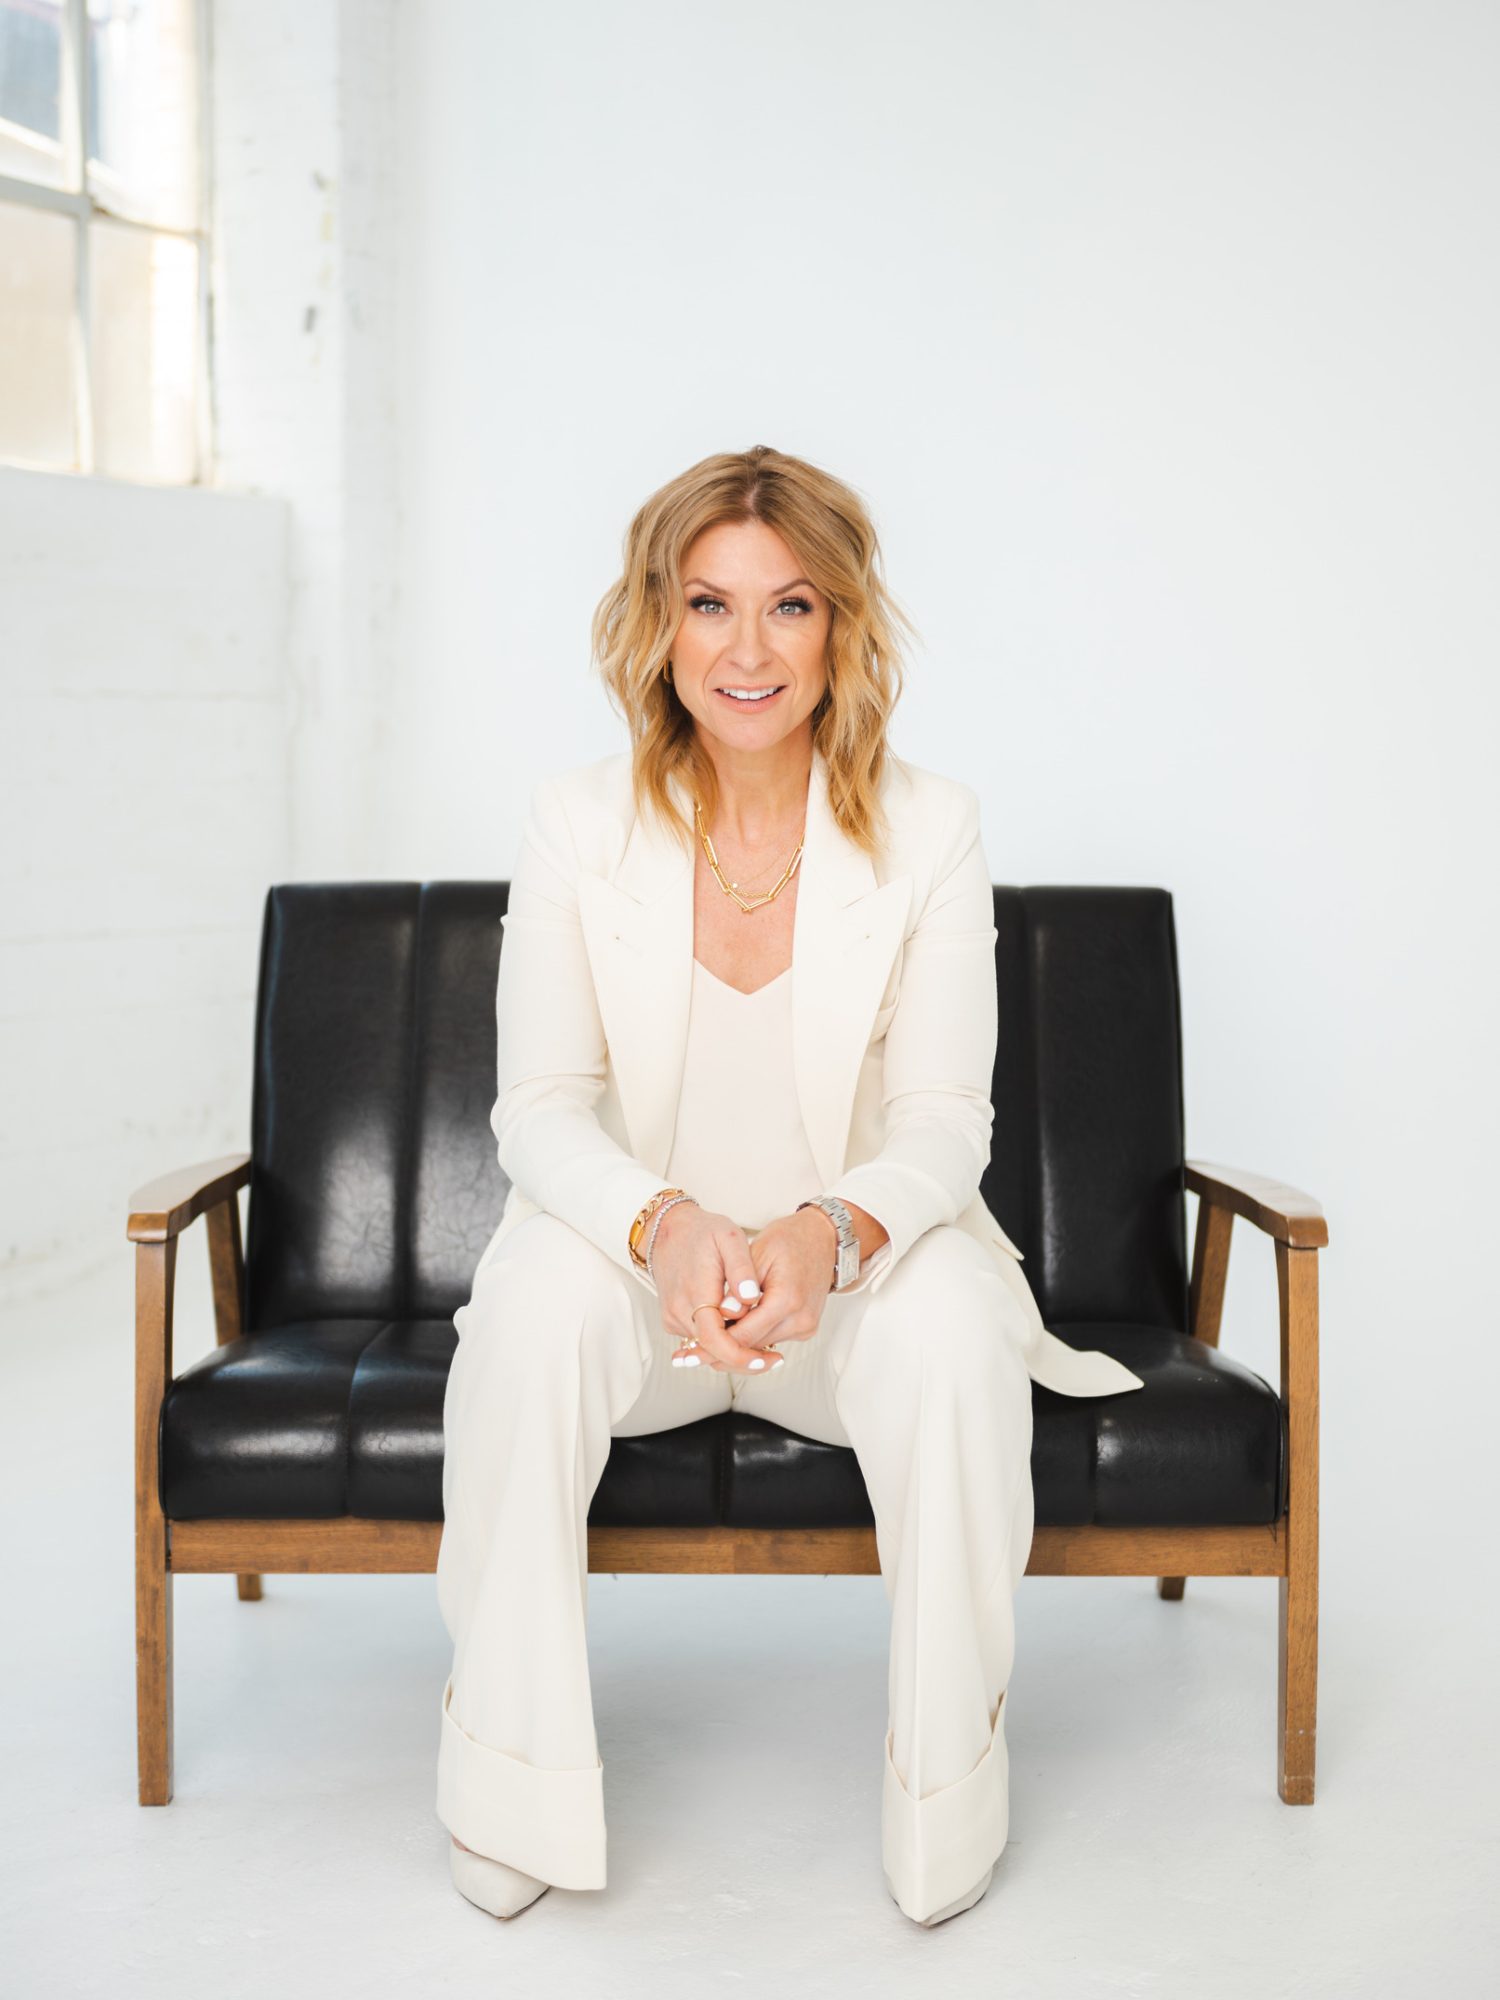 Jennifer Flanagan wearing a white suit. She has tussled wavy blonde hair and is seated on a leather loveseat in a white room.